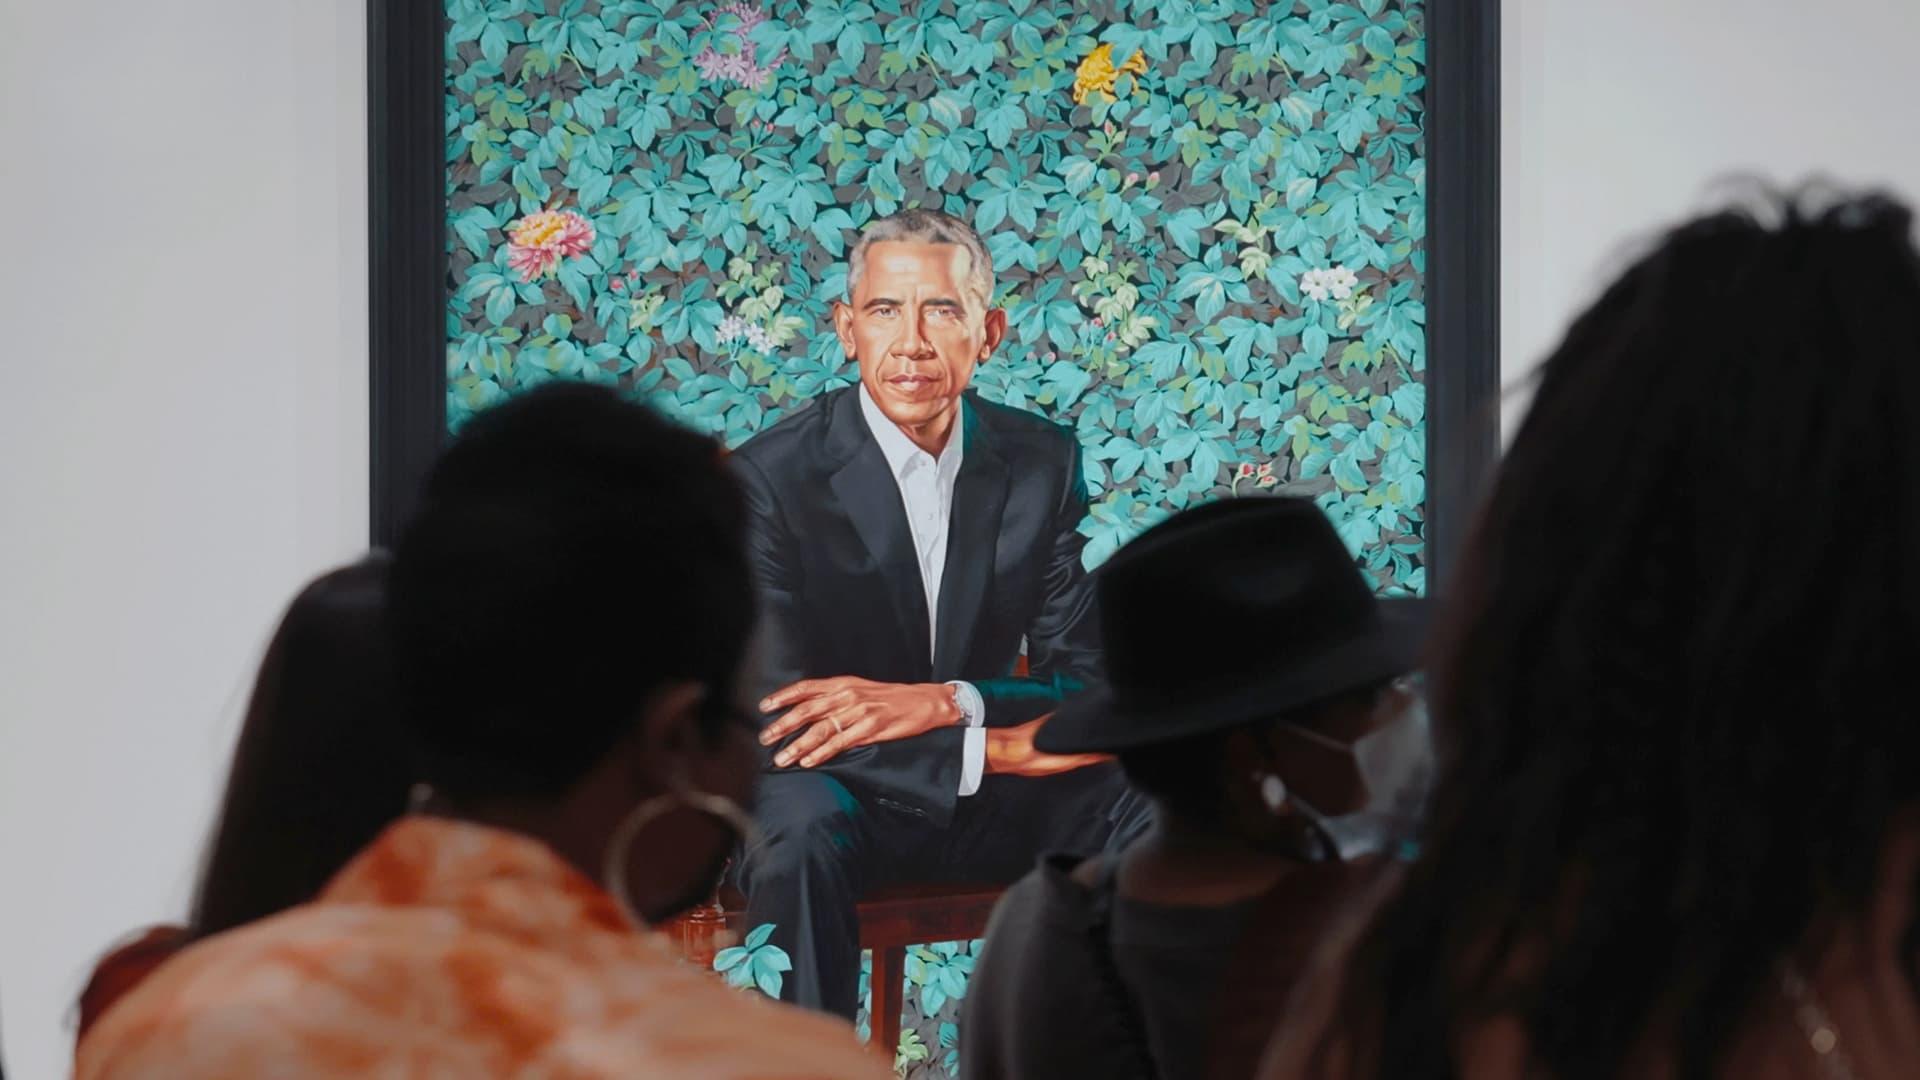 Picturing the Obamas backdrop